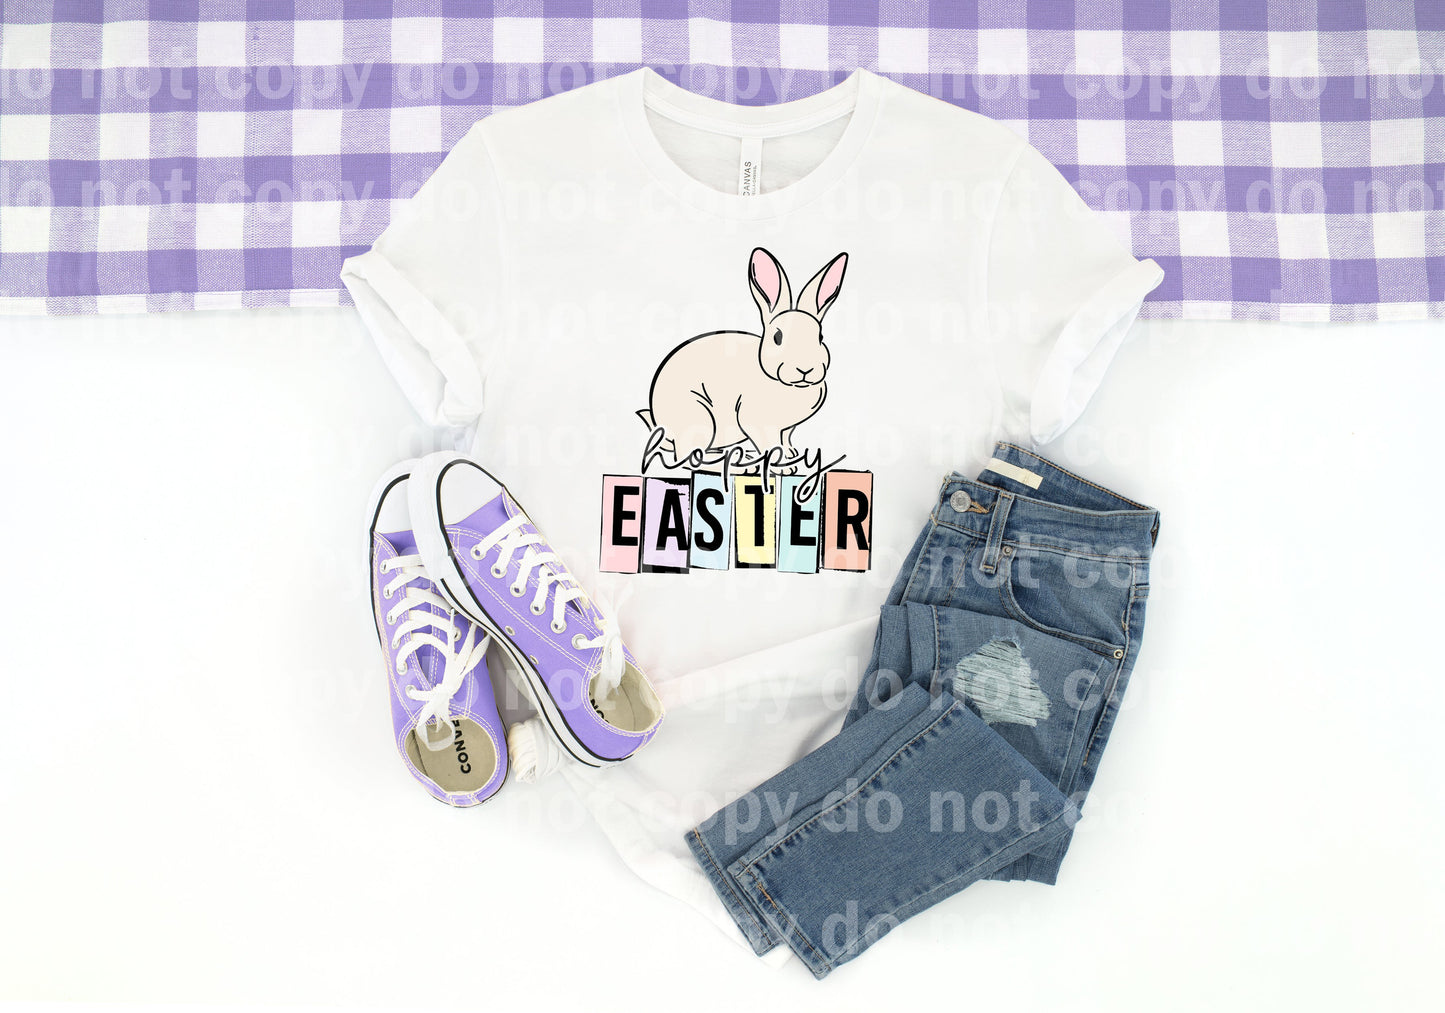 Hoppy Easter Bunny Full Color/One Color Dream Print or Sublimation Print